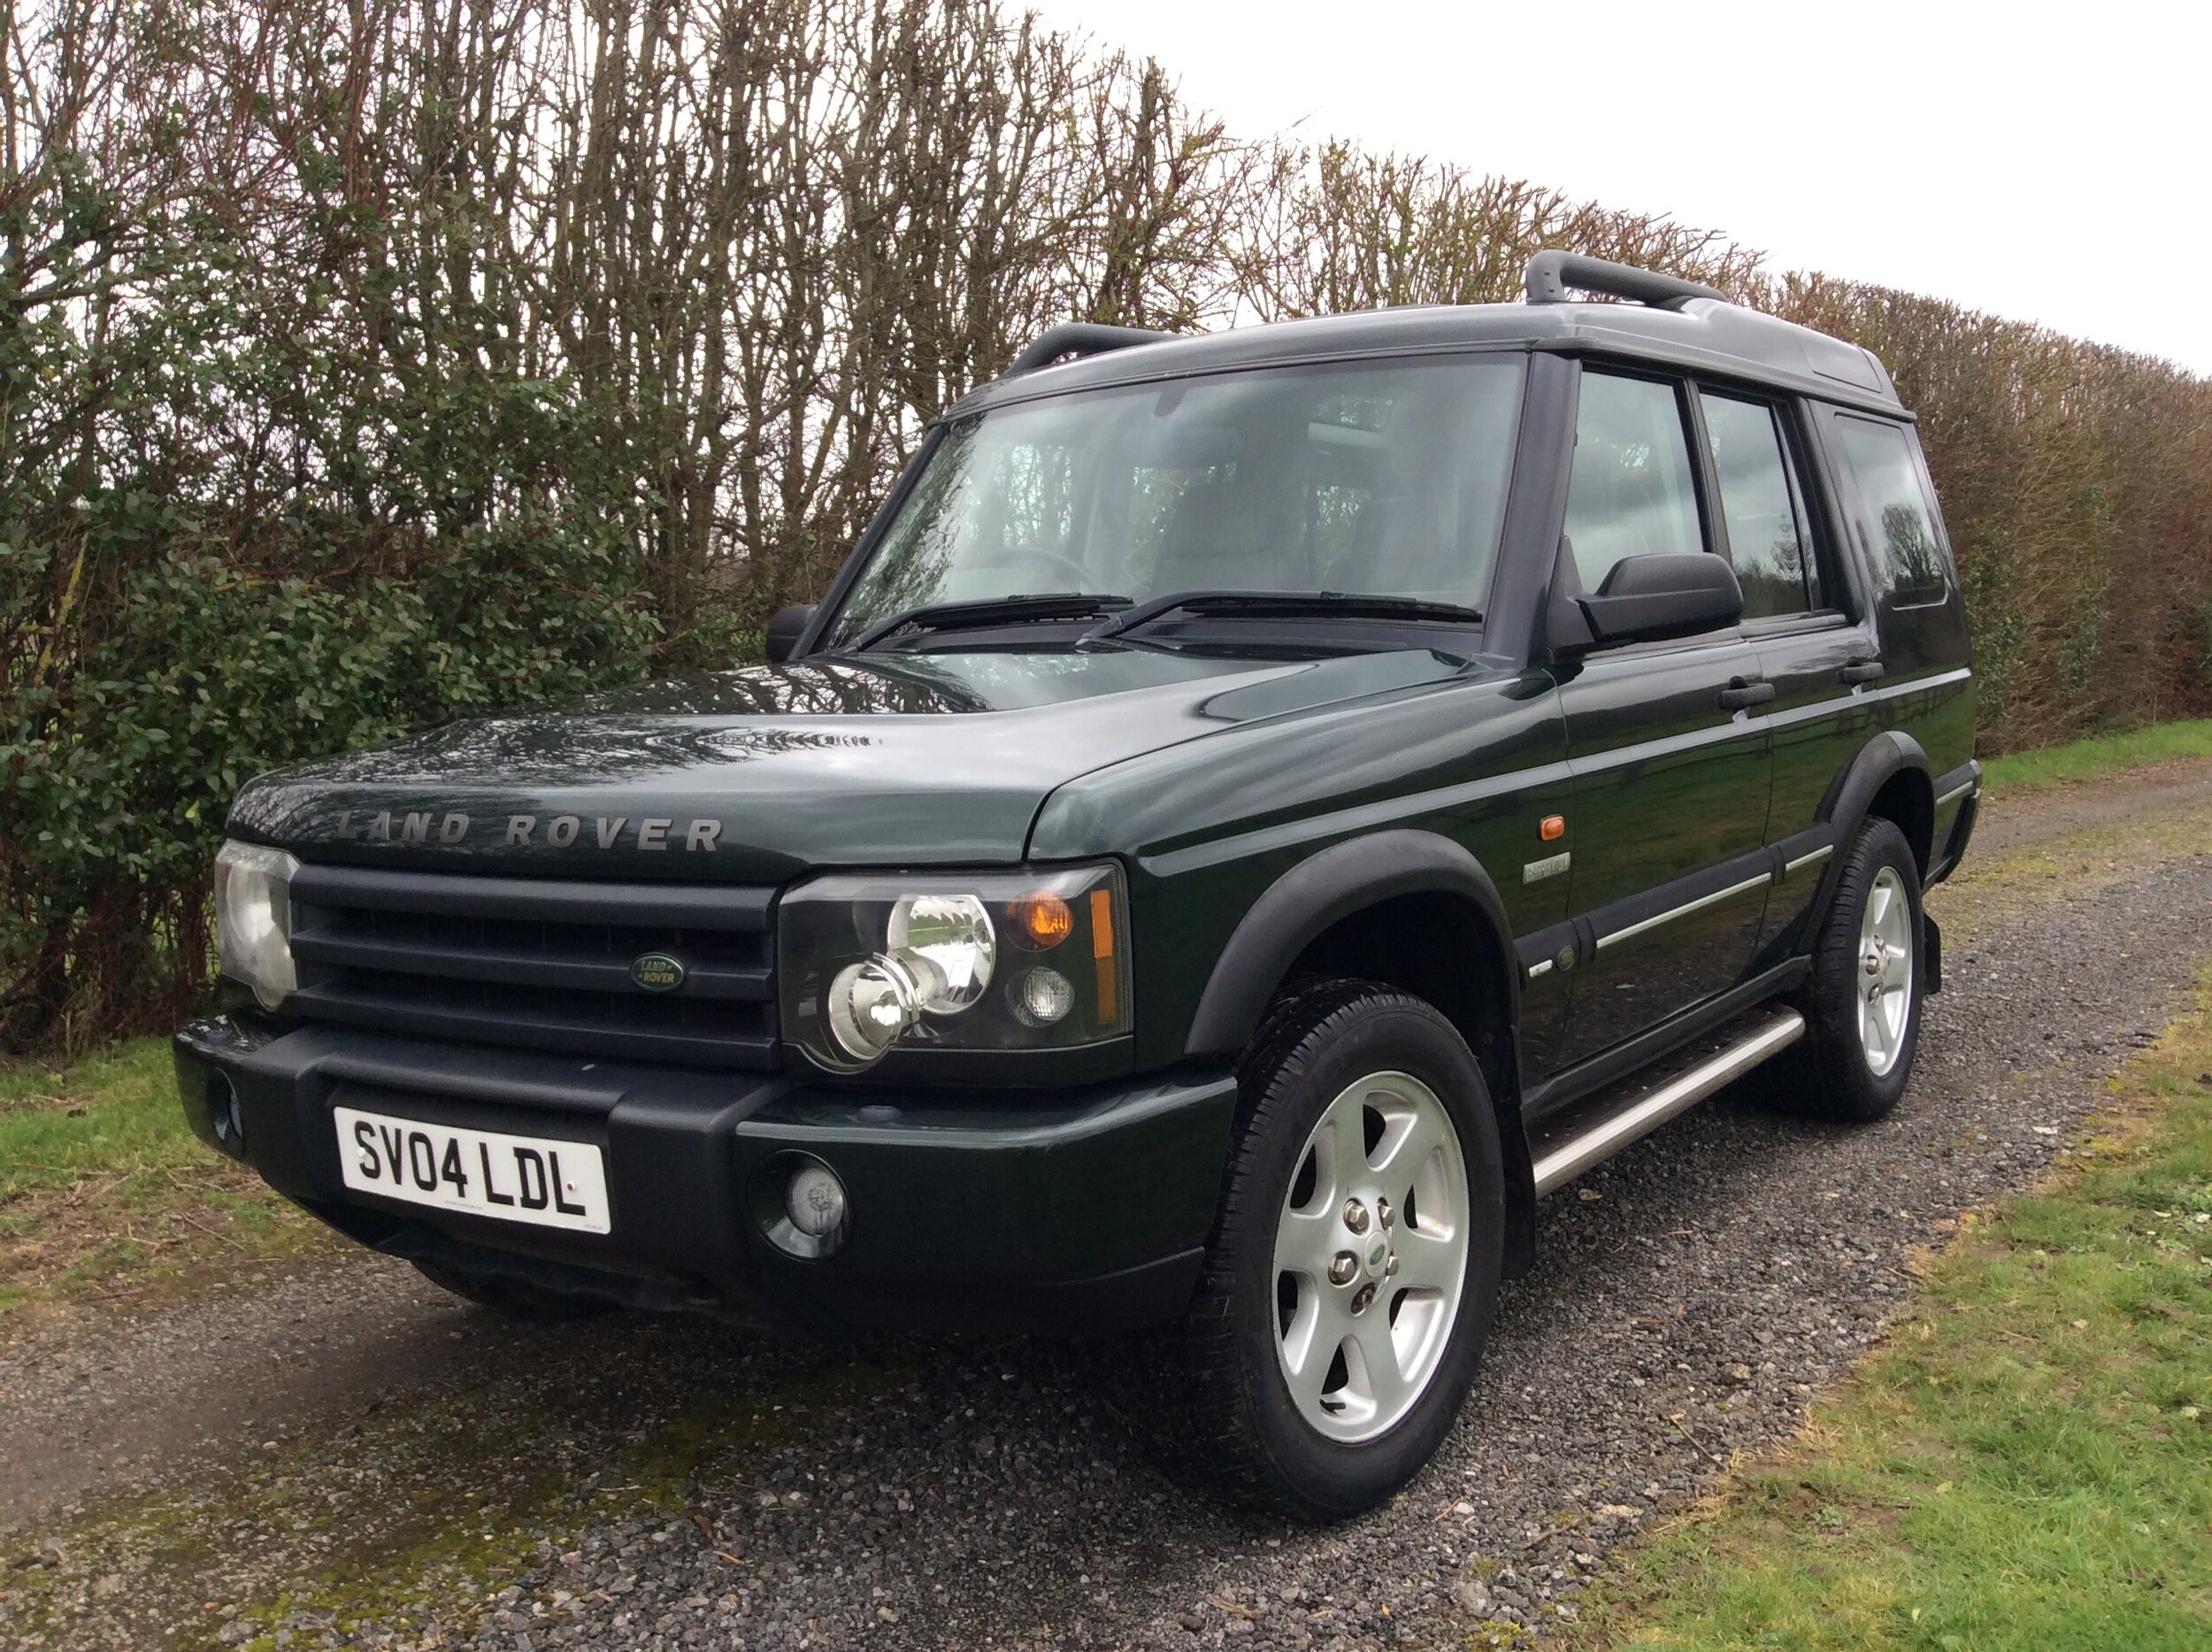 Land Rover Discovery 2 4.0l V8 - Low miles